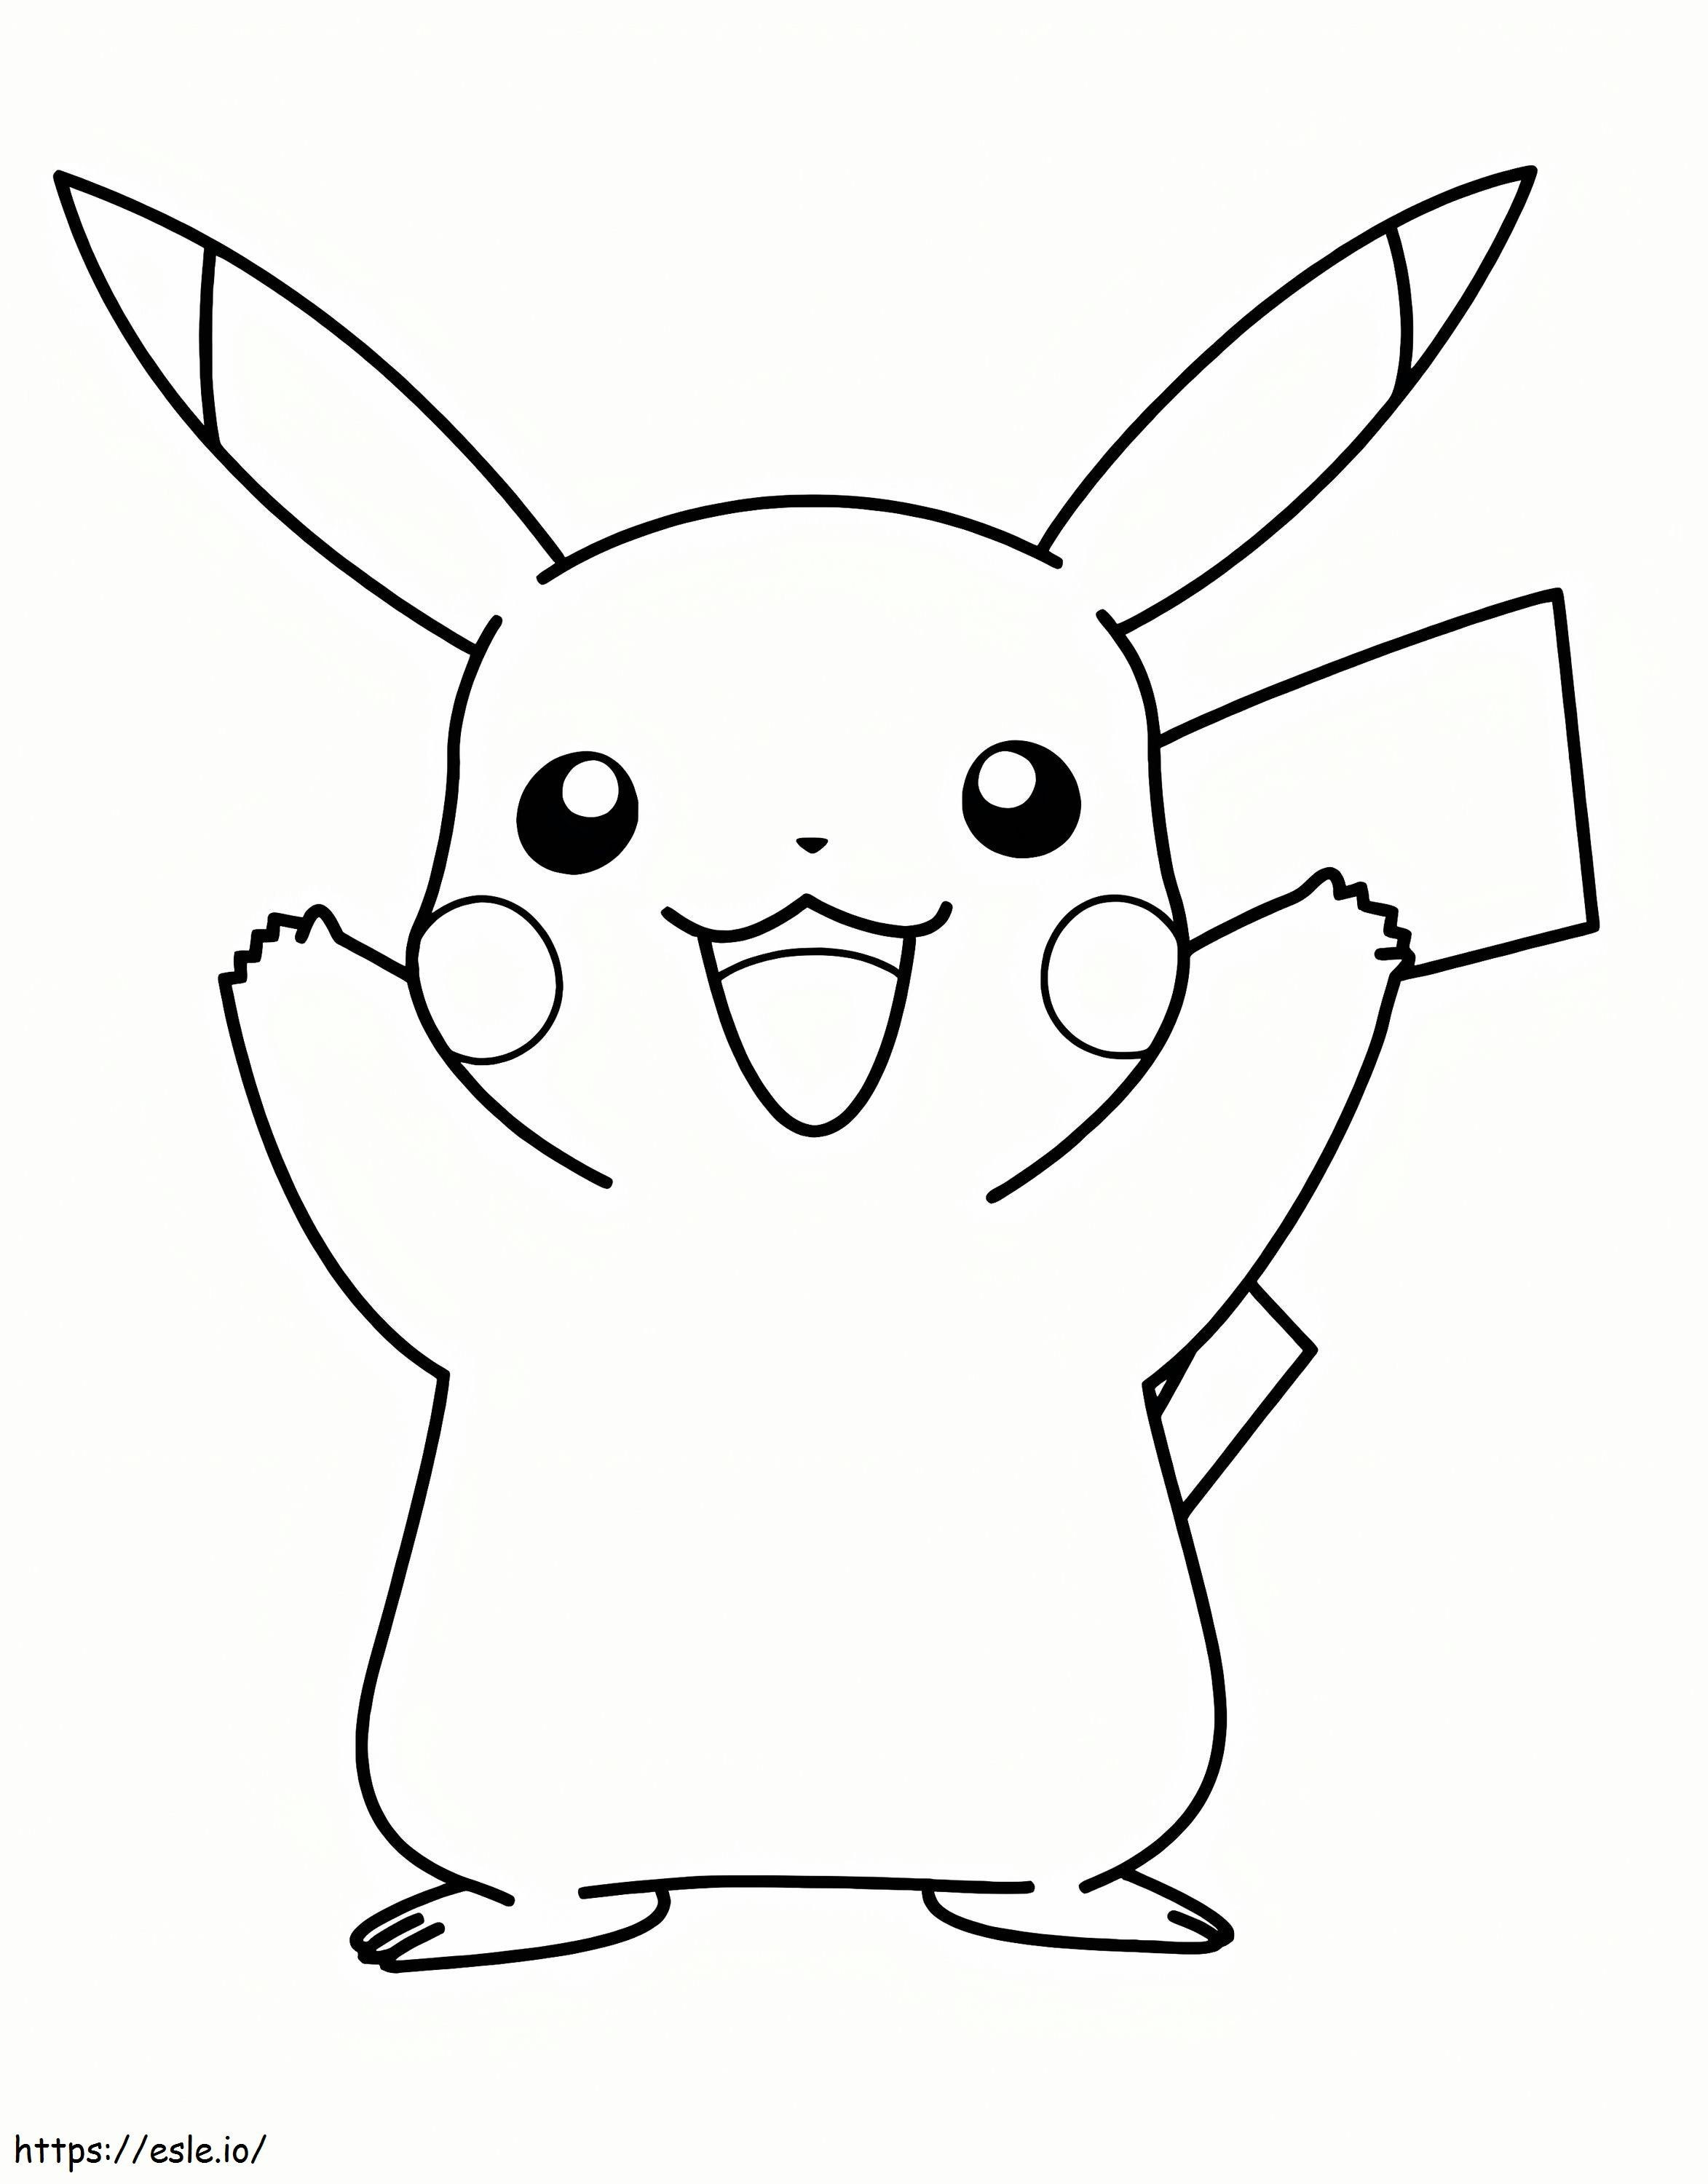 Pikachu Is Happy coloring page